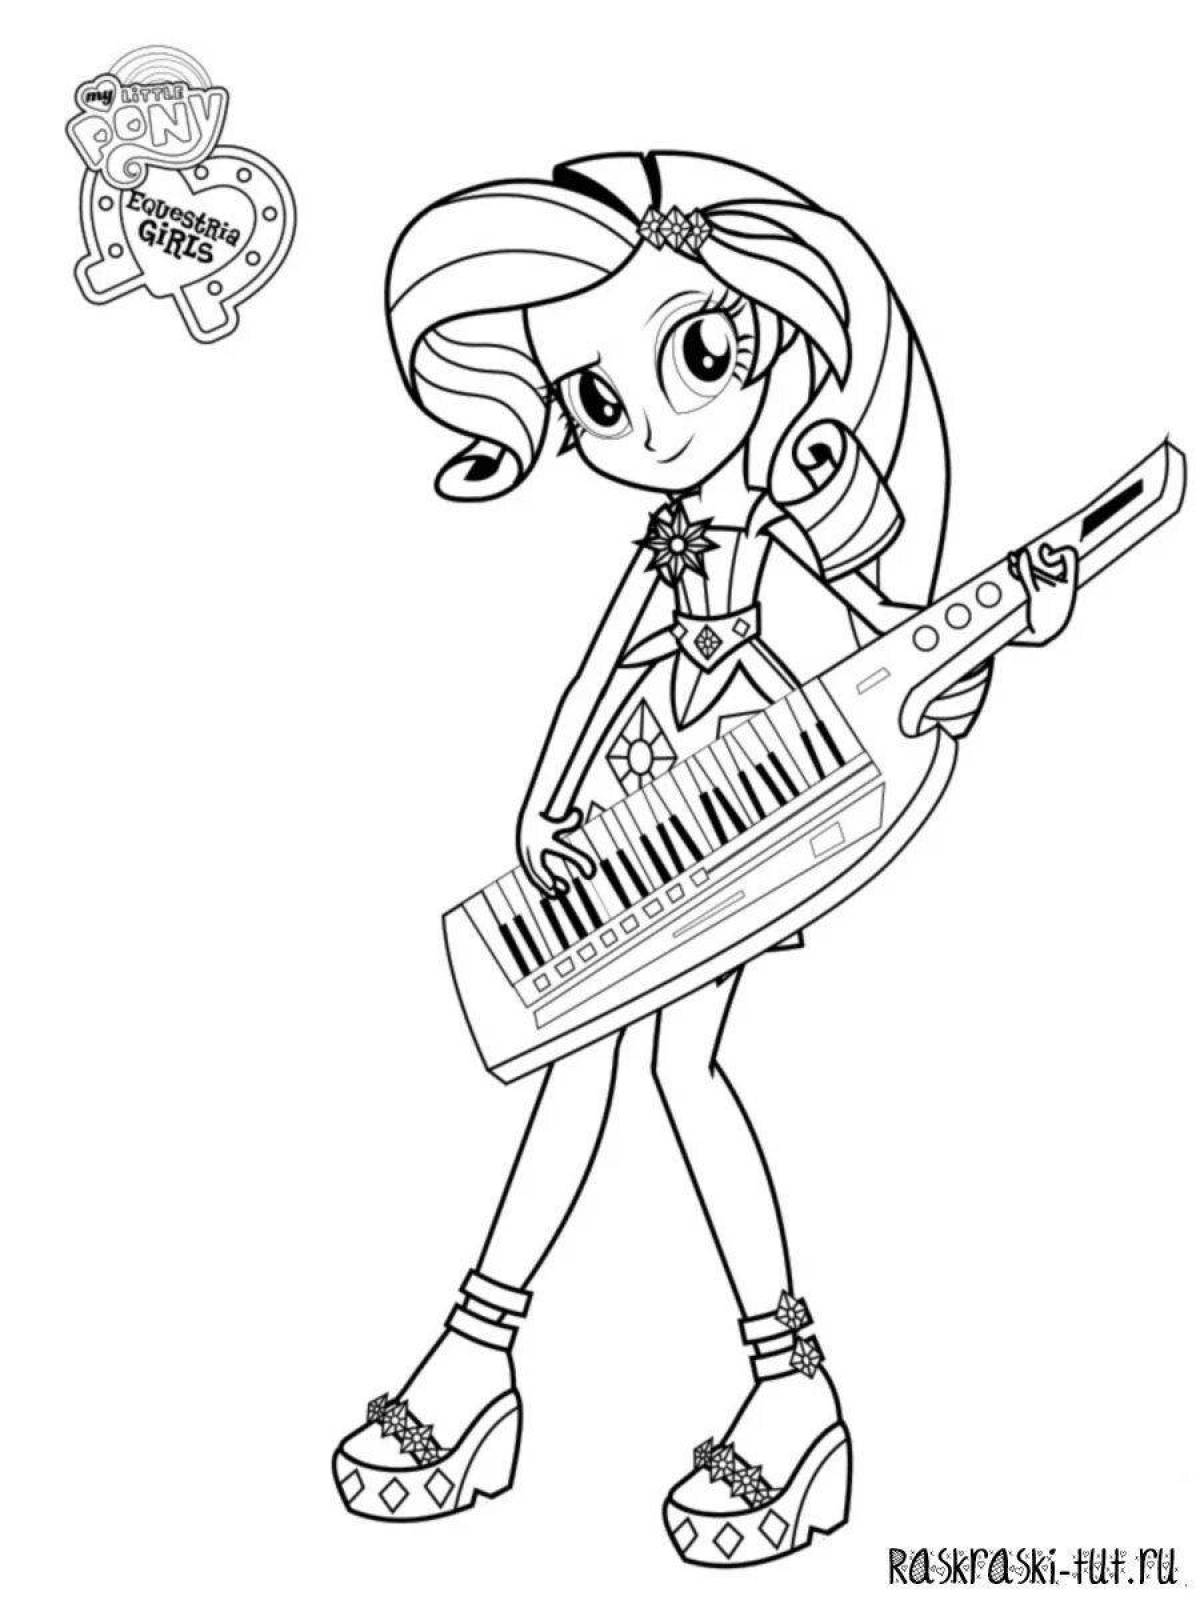 Coloring page happy equestria girls